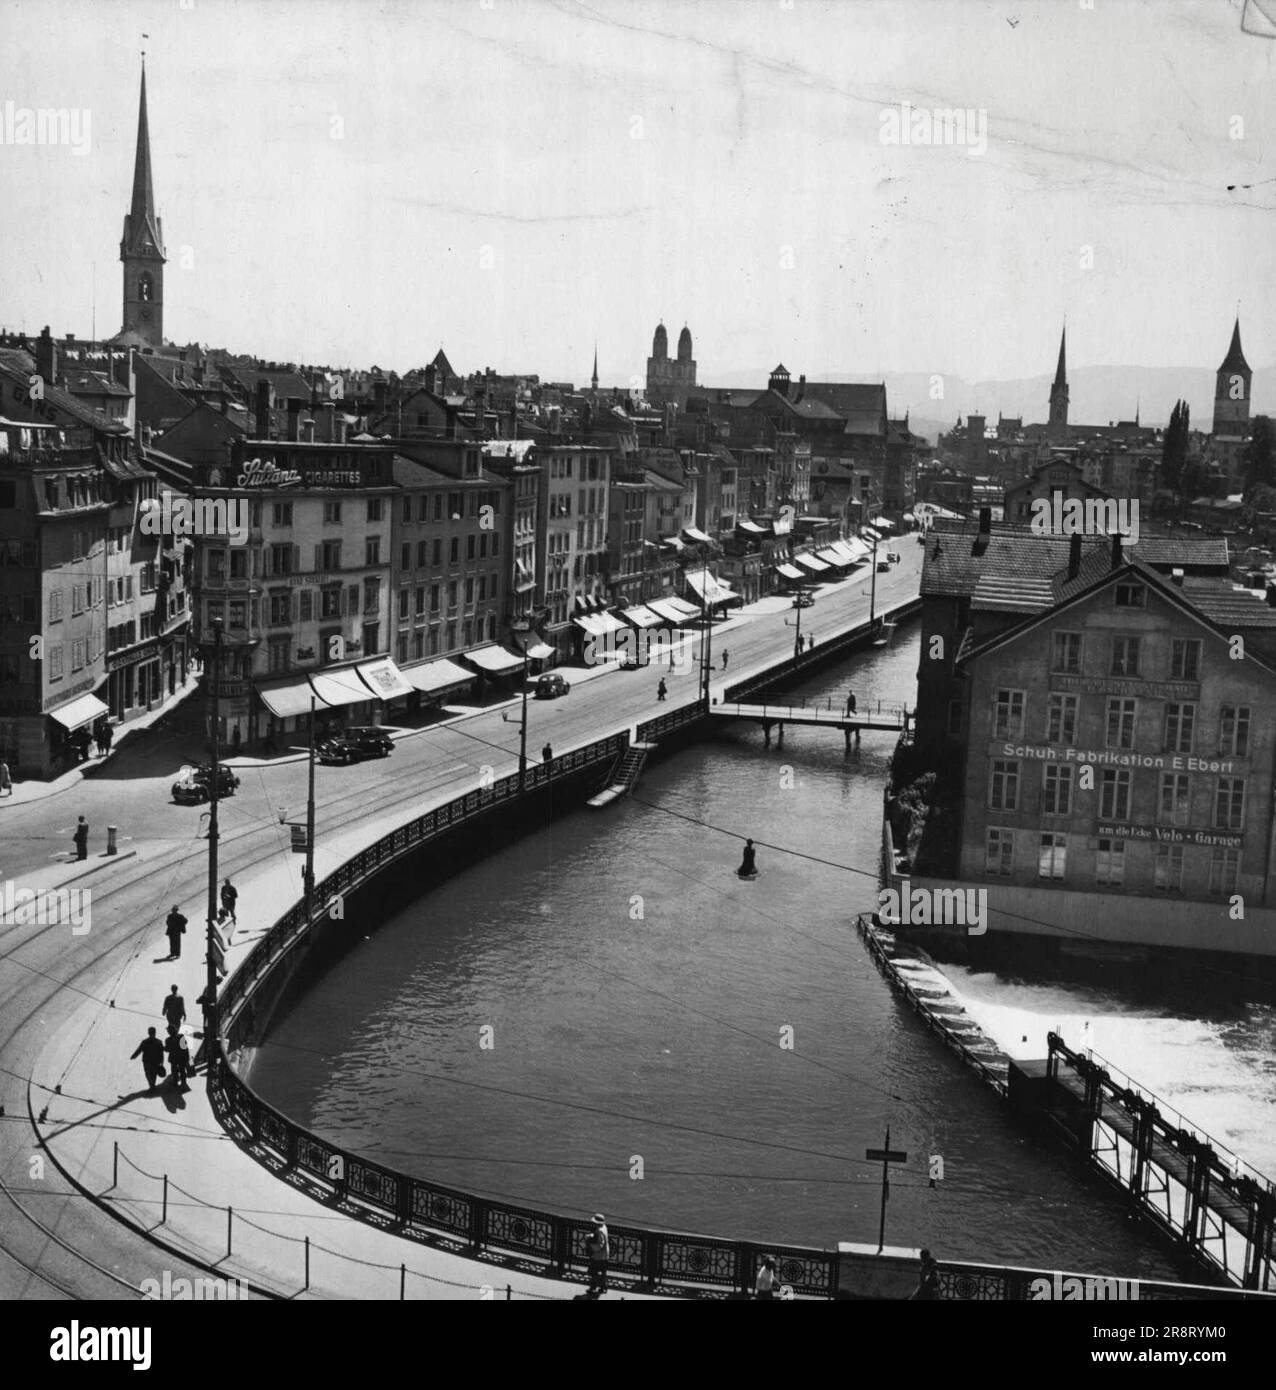 Zurich, principal city of Switzerland. General view showing the River Limmat. On the left the Limmatquai; in the distance the twin-steepled Grossmunster Cathedral. August 16, 1953. (Photo by Camera Press). Stock Photo